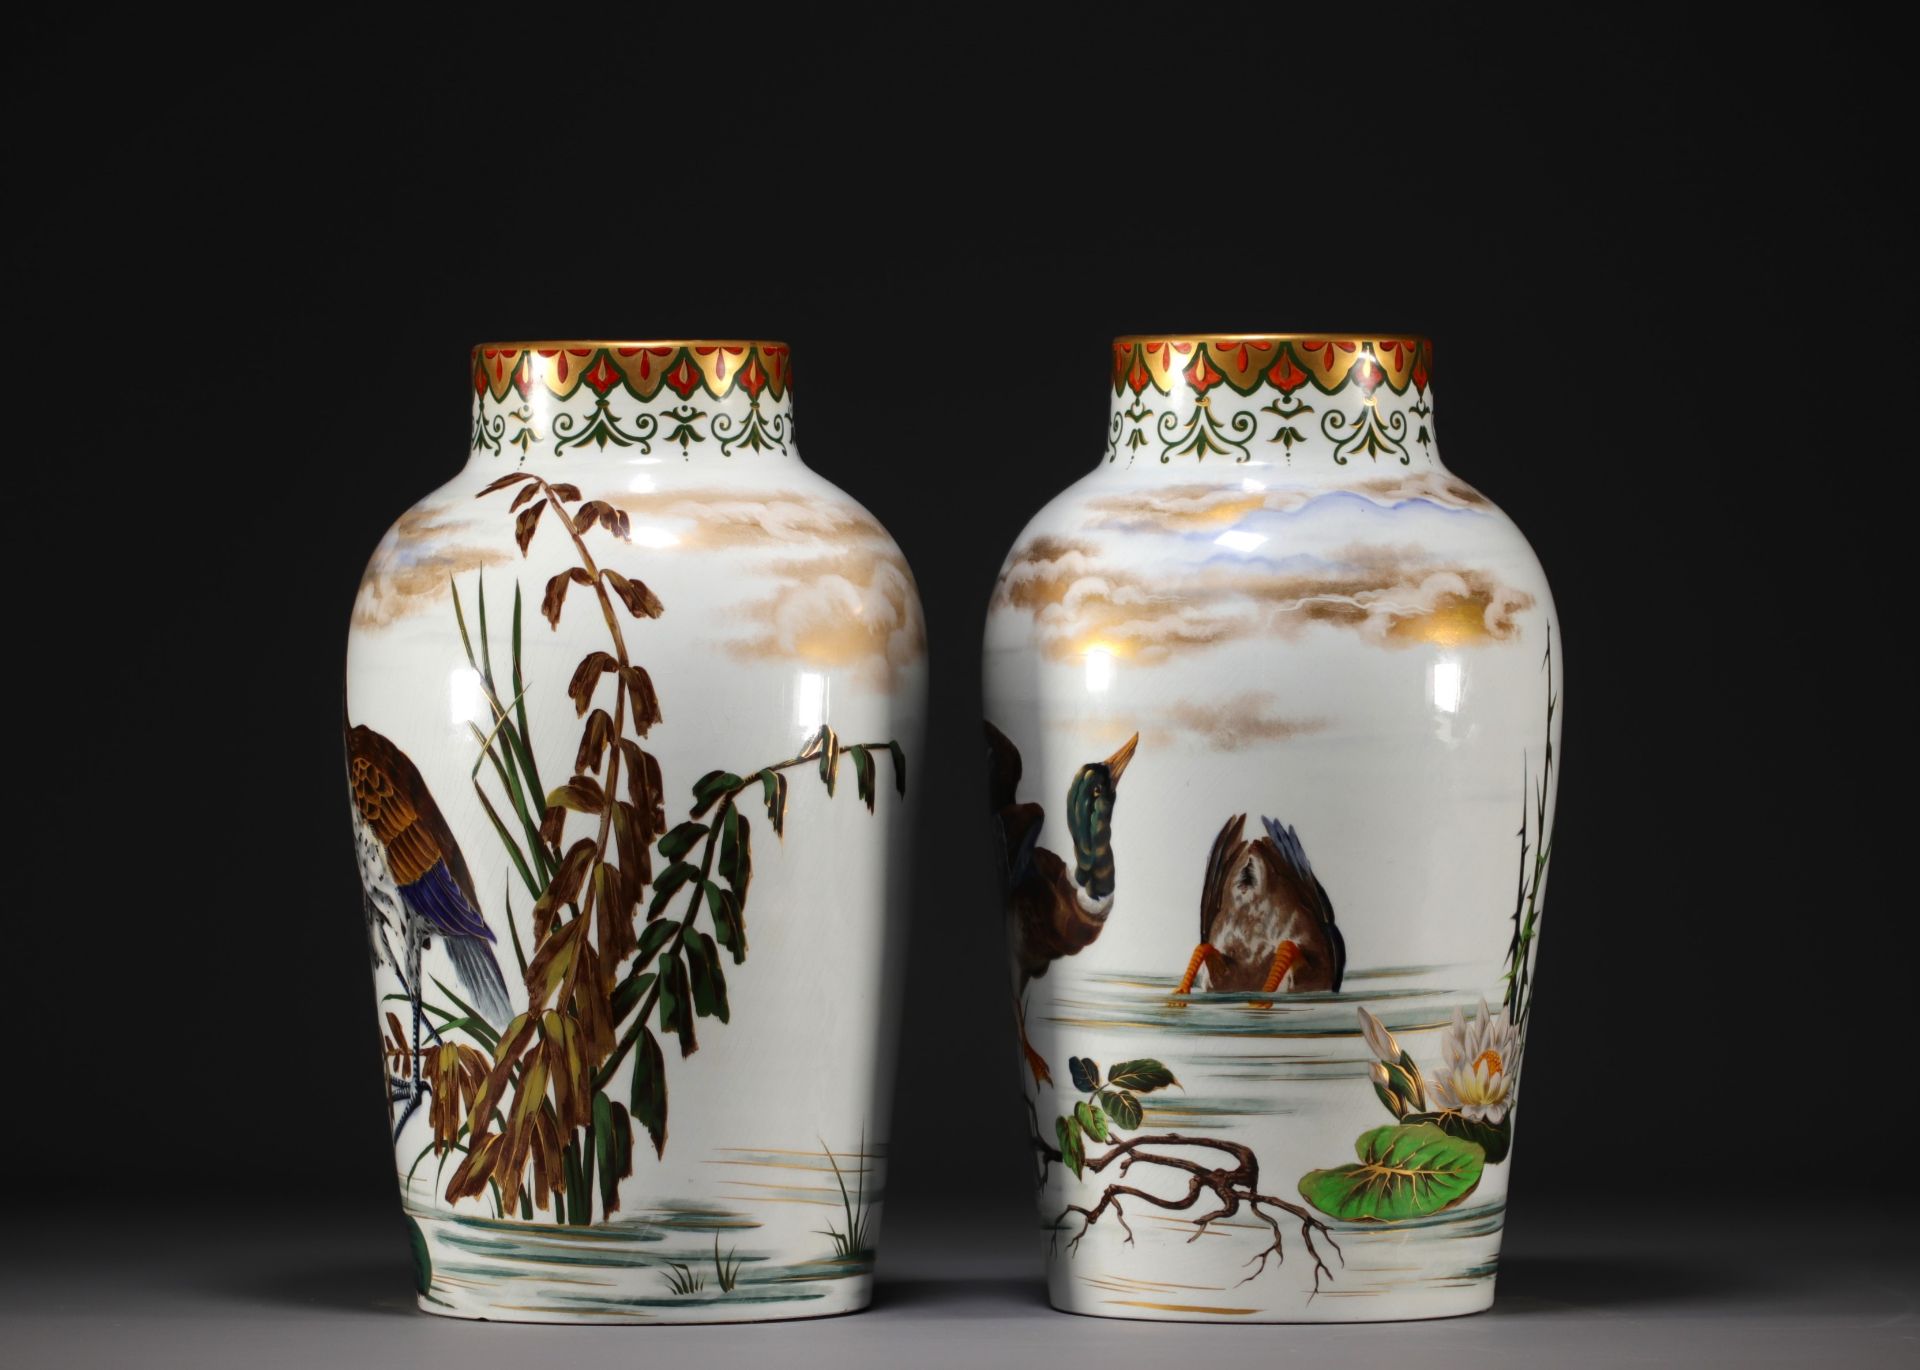 Taxile DOAT (1851-1938) - Pair of Japanese porcelain vases decorated with birds, circa 1900. - Image 4 of 5